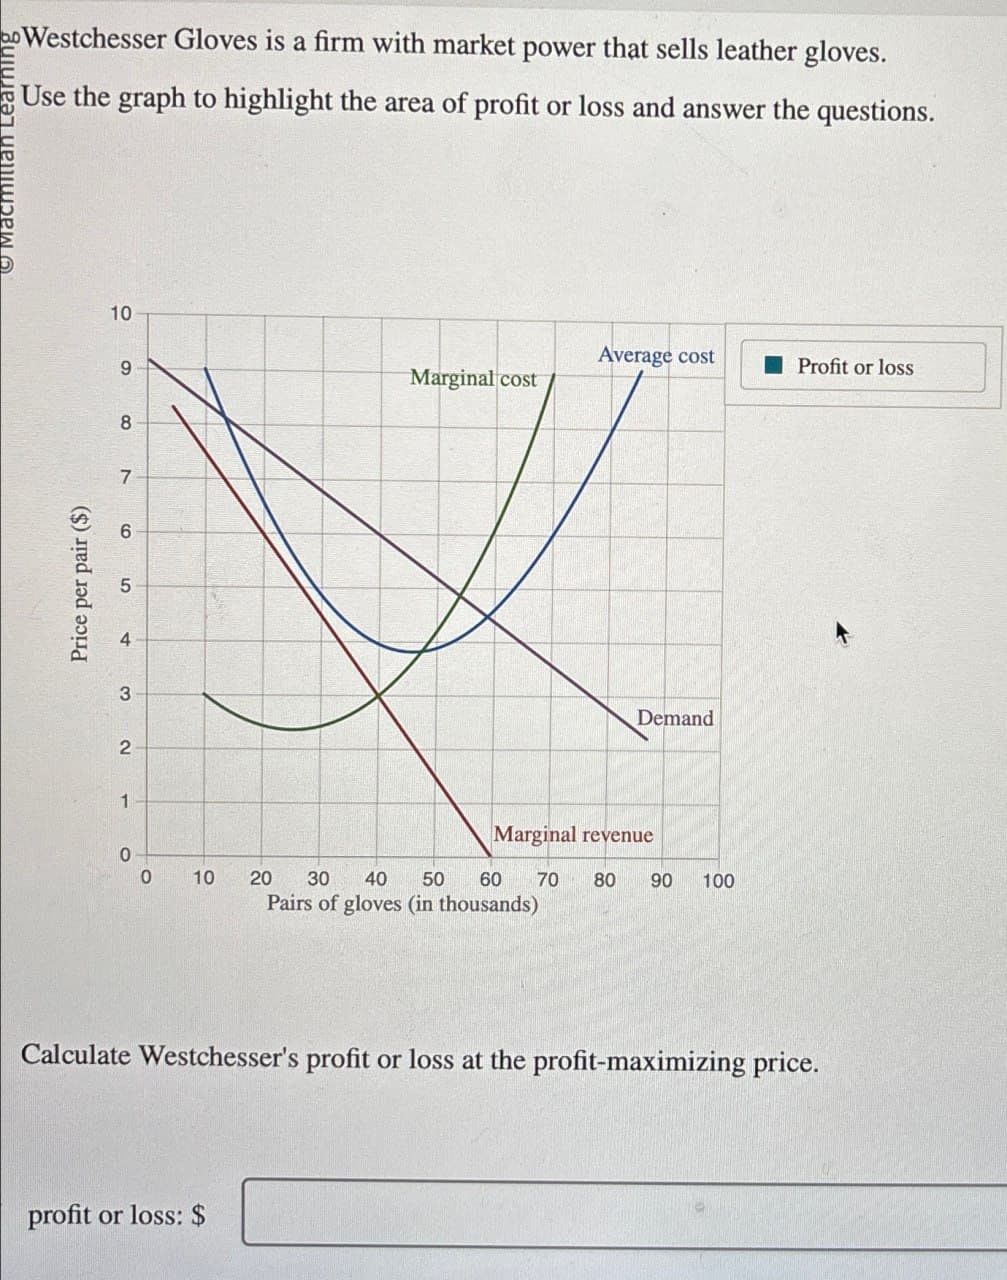 Macmillan Learning
Westchesser Gloves is a firm with market power that sells leather gloves.
Use the graph to highlight the area of profit or loss and answer the questions.
Price per pair ($)
1
2
3
4
5
6
7
10
Average cost
6
Profit or loss
Marginal cost
8
Demand
Marginal revenue
0
0
10
20 30 40 50 60 70 80 90
100
Pairs of gloves (in thousands)
Calculate Westchesser's profit or loss at the profit-maximizing price.
profit or loss: $